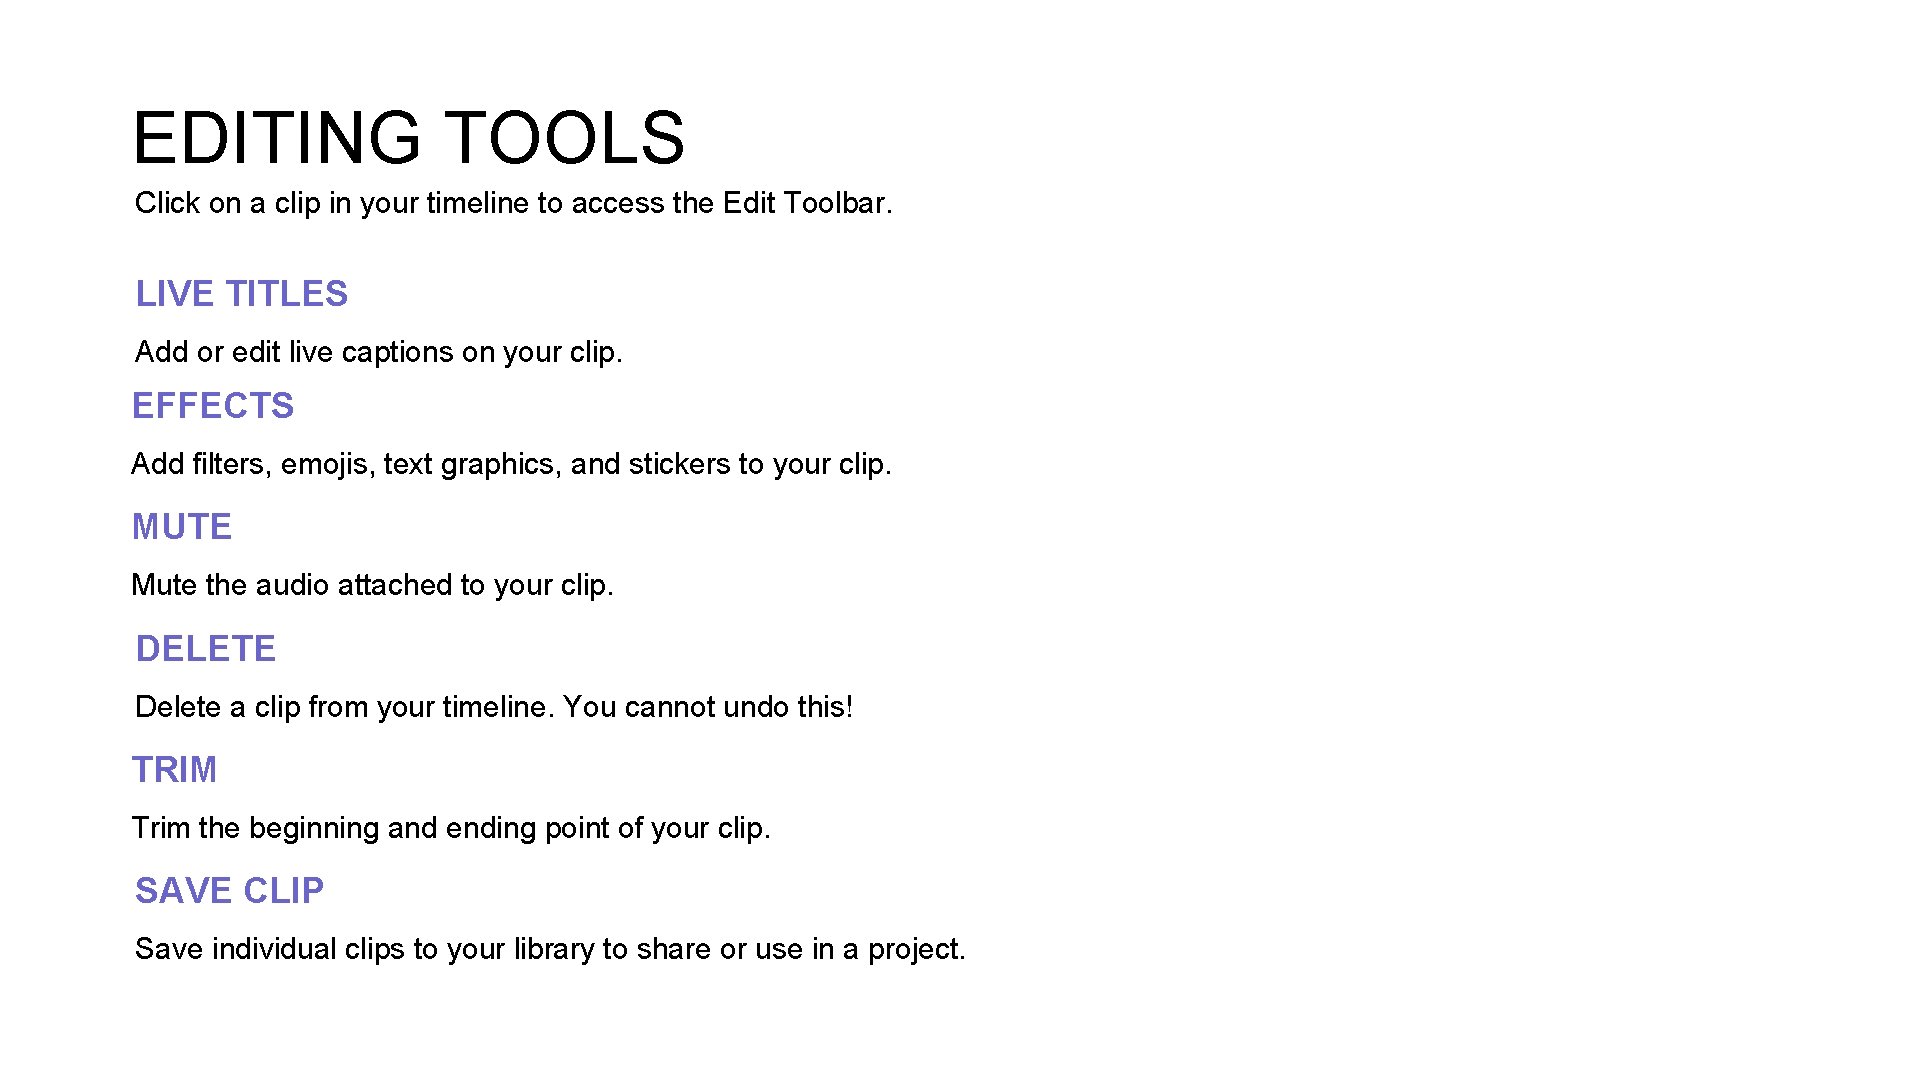 EDITING TOOLS Click on a clip in your timeline to access the Edit Toolbar.